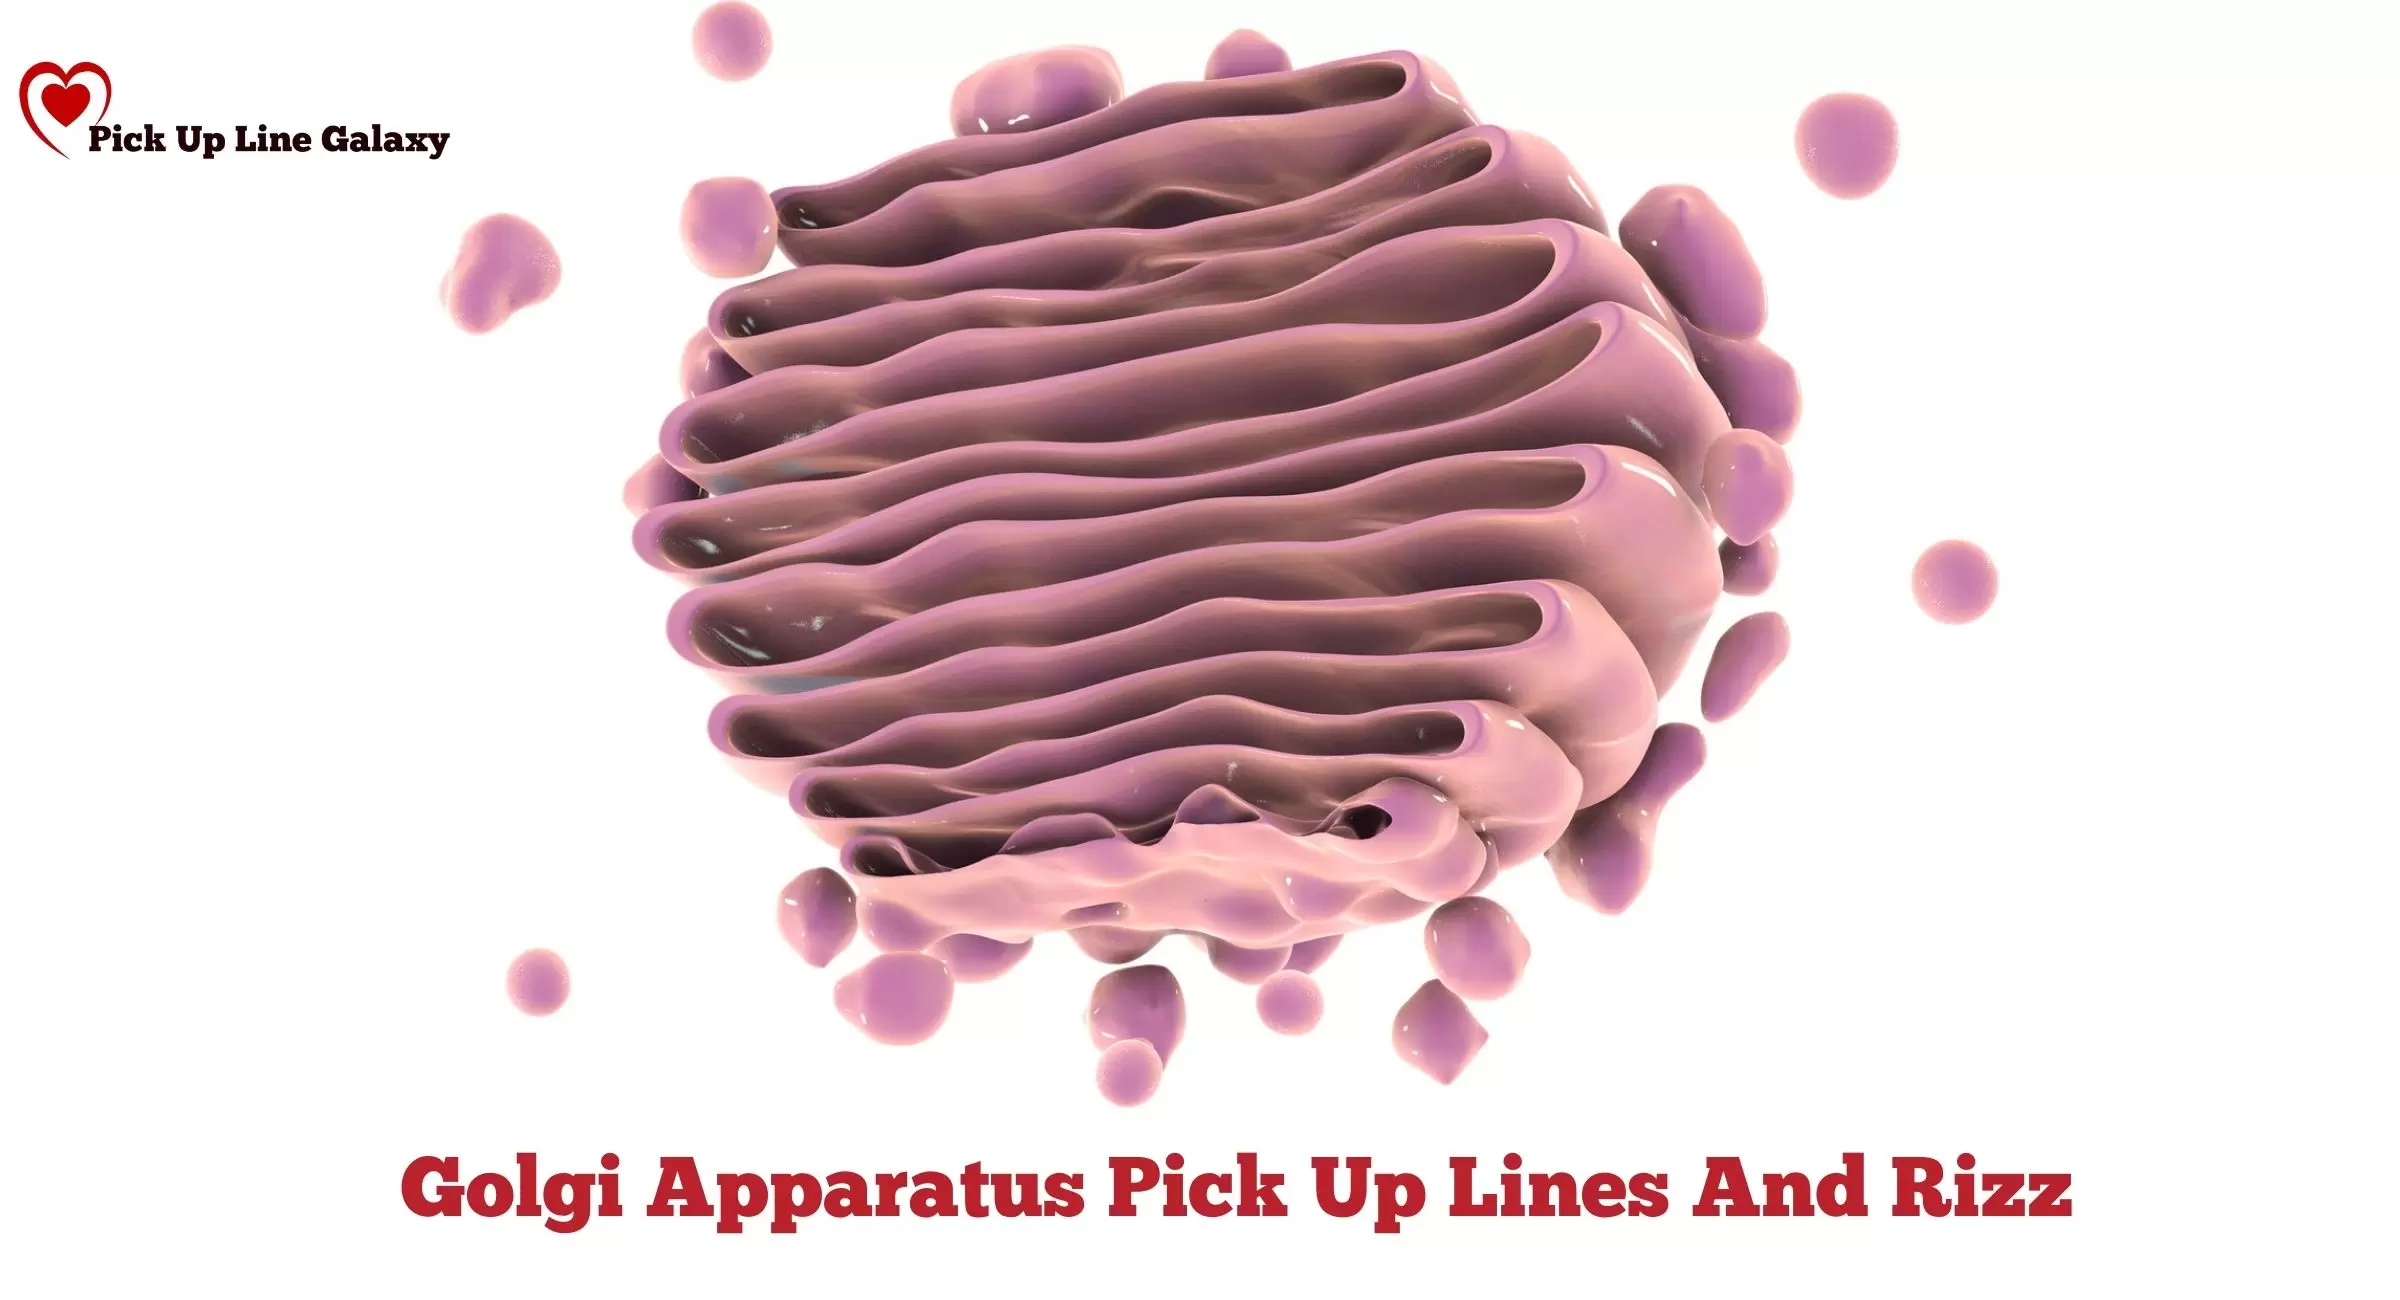 Golgi Apparatus Pick Up Lines And Rizz